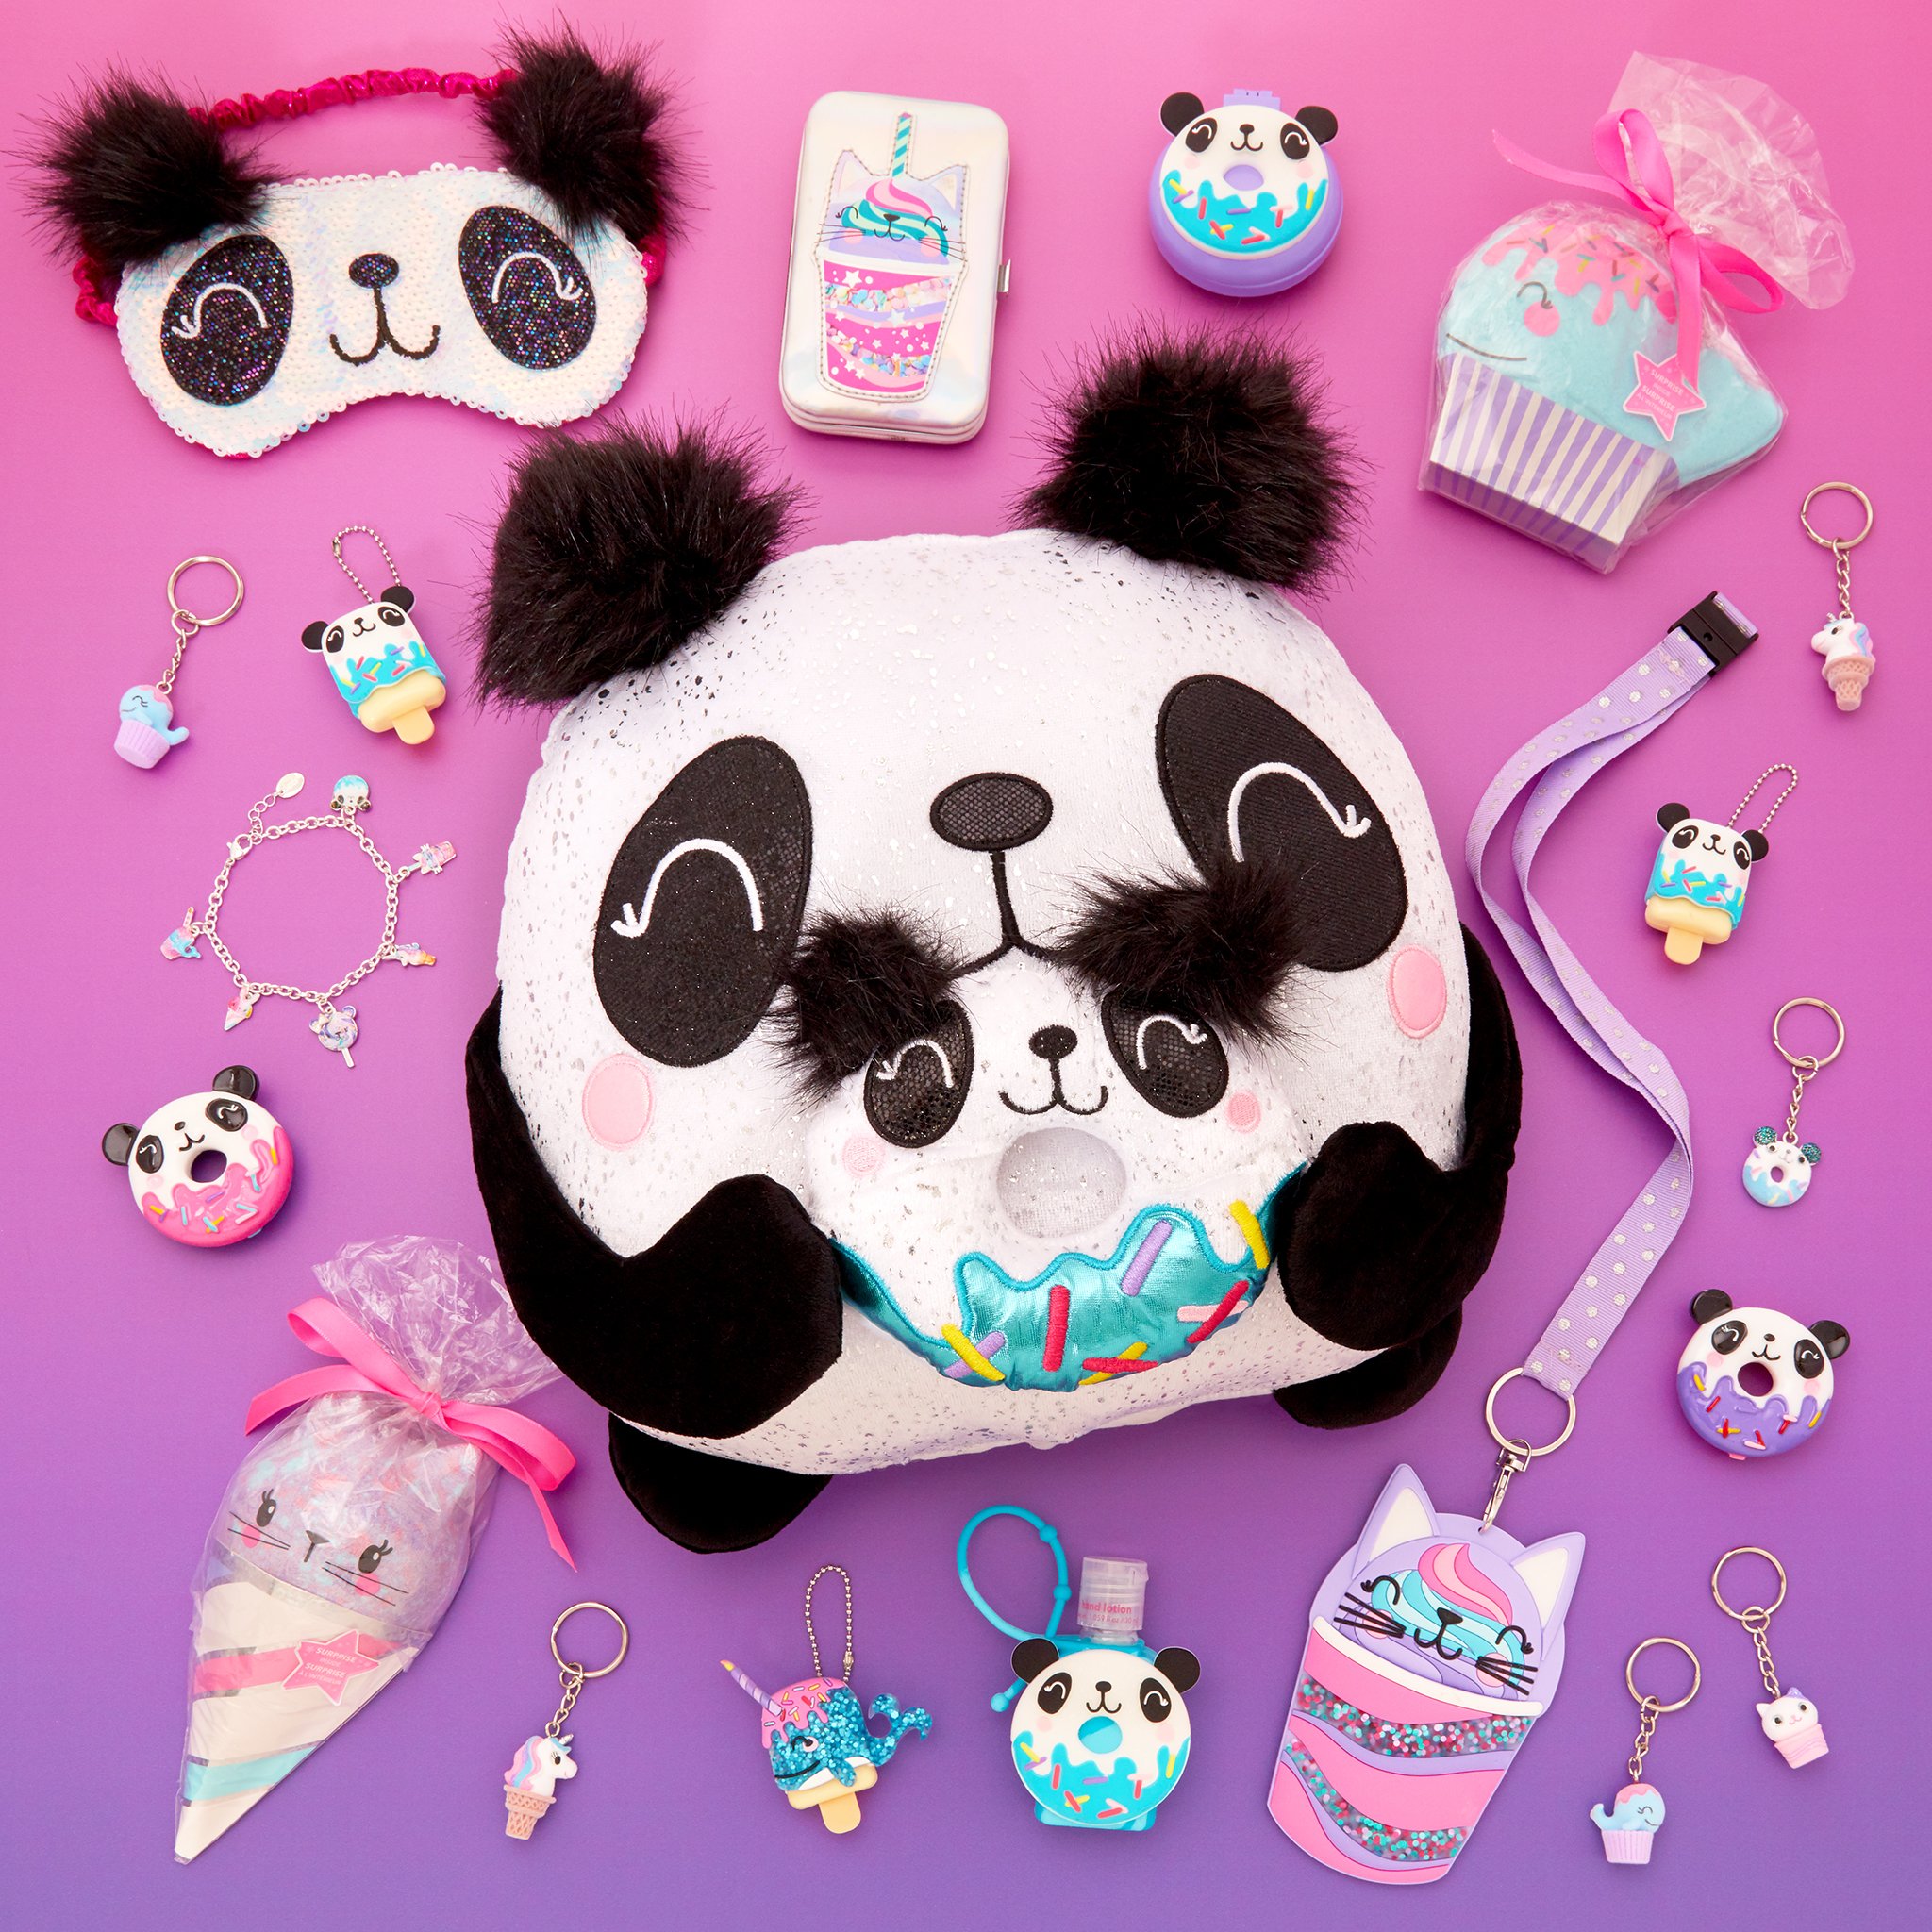 Eddike Muldyr kubiske Claire's on Twitter: "We 💖 our super cute Sweetimals accessories! Shop in  store &amp; online now #ItsAtClaires https://t.co/s5vaRkEgzX" / X